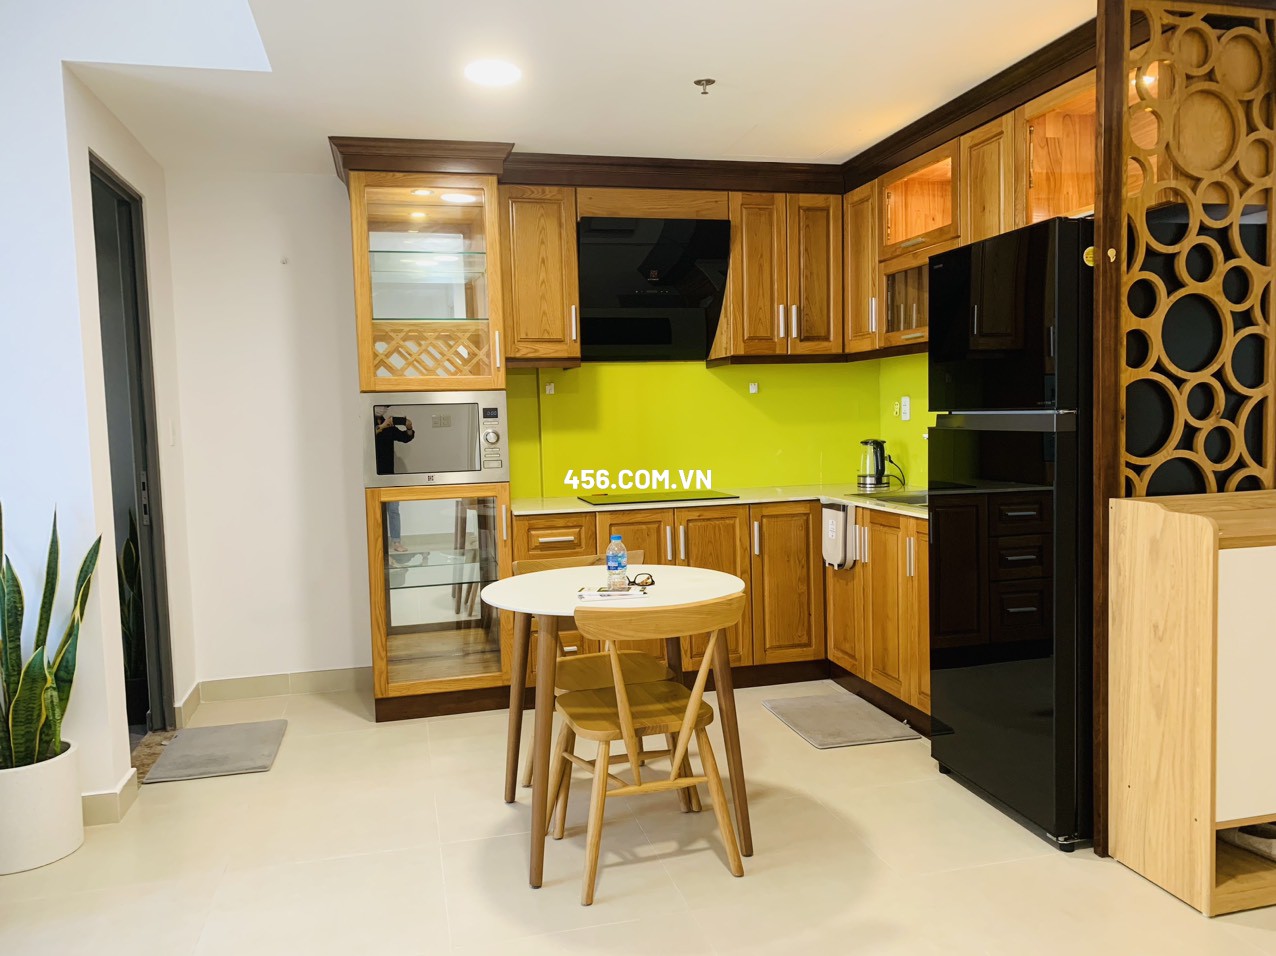 Hinh-1 Bedrooms in Masteri Thao Dien apartment for rent nice furniture